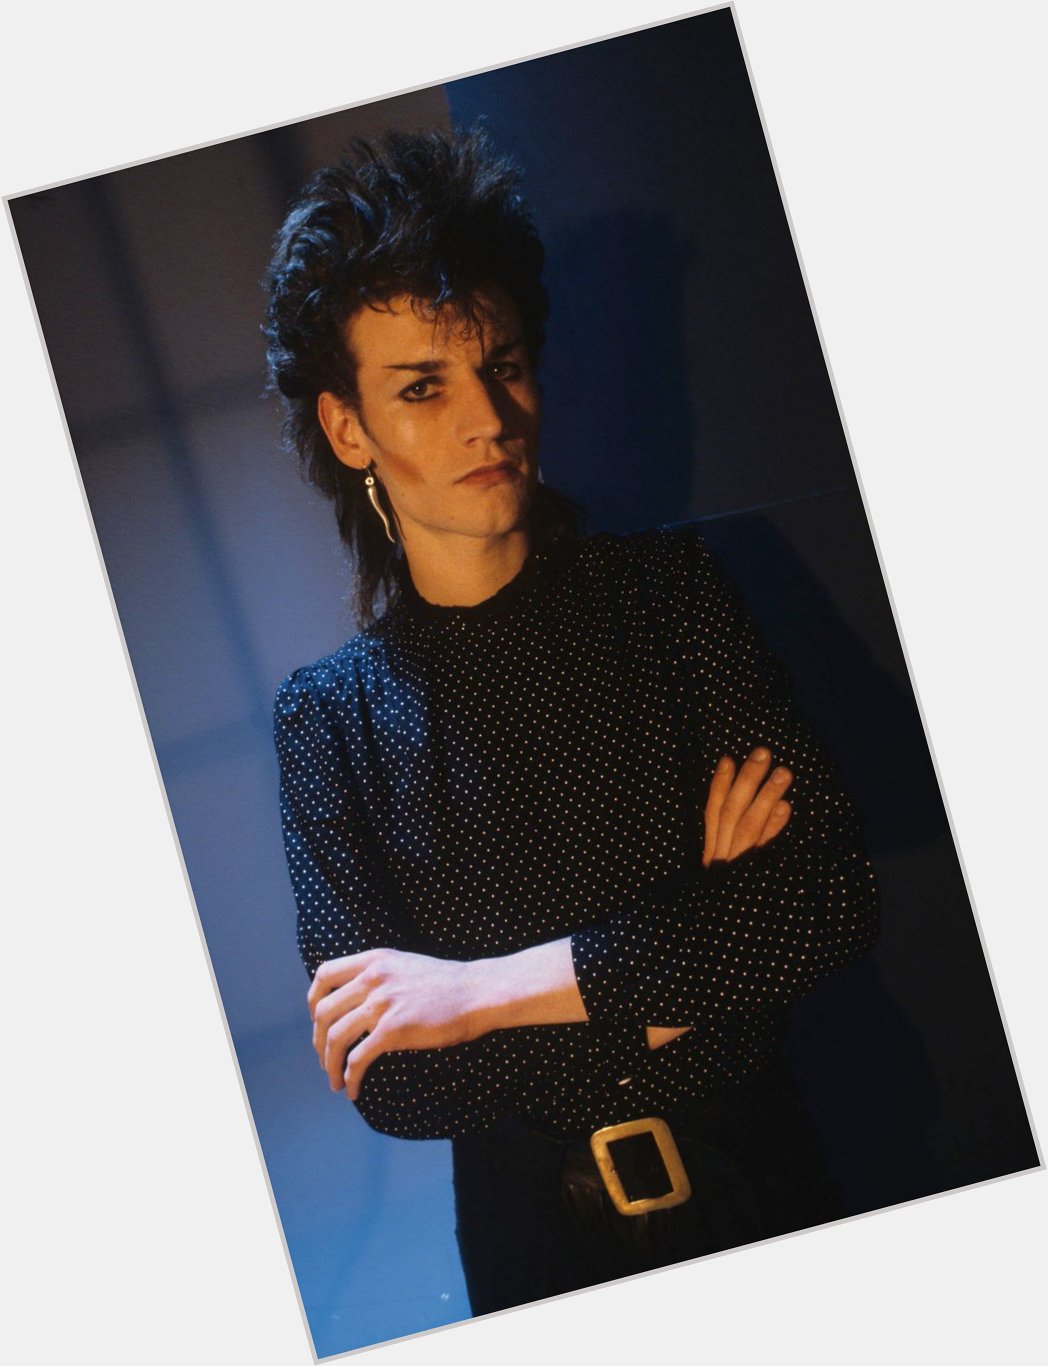 Happy birthday Daniel Ash of Bauhaus, Love and Rockets and Tones on Tail! 